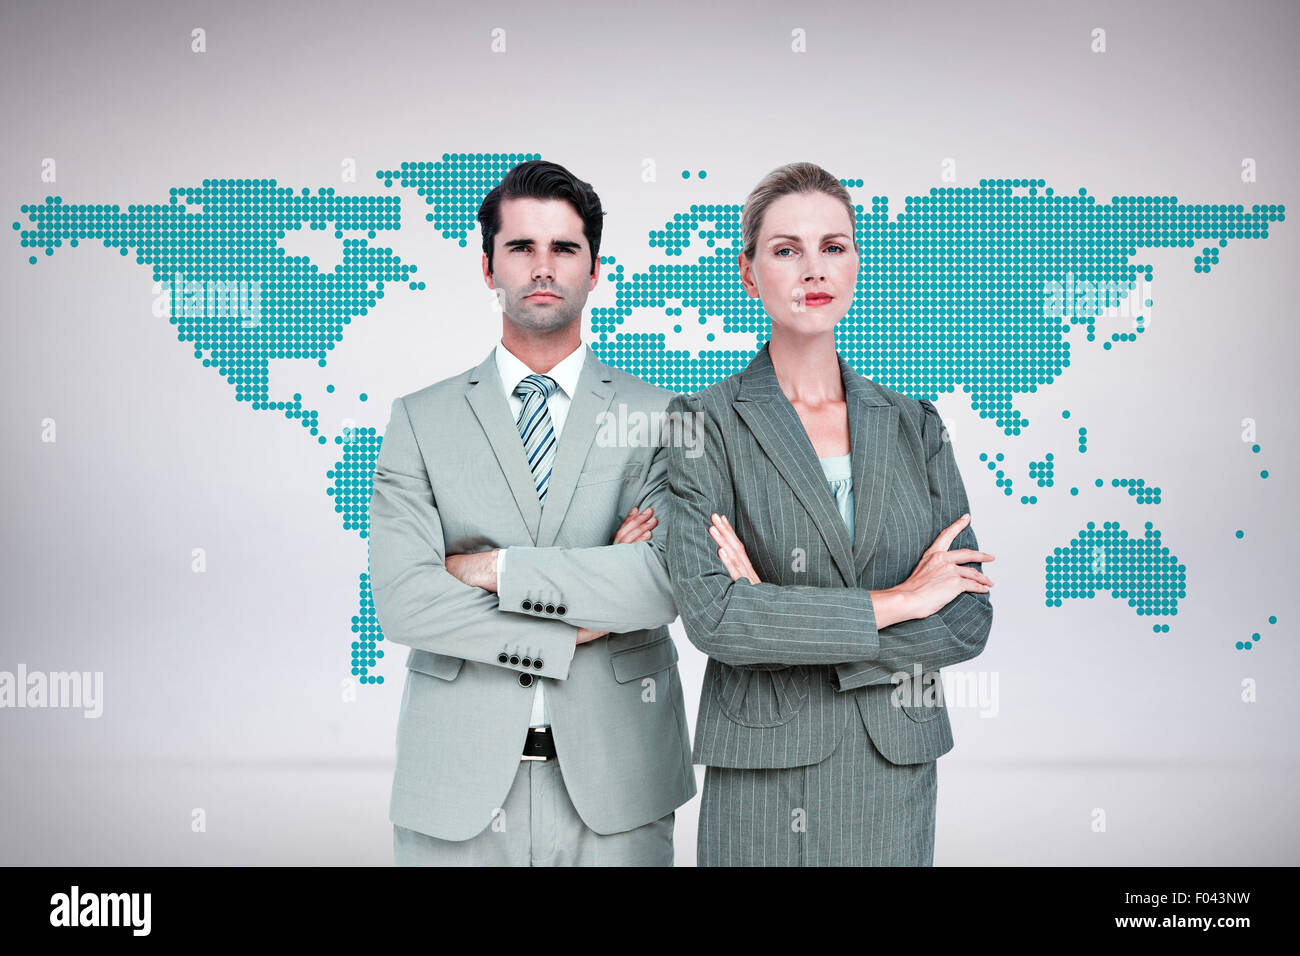 Composite image of business people with arms crossed looking at camera Stock Photo